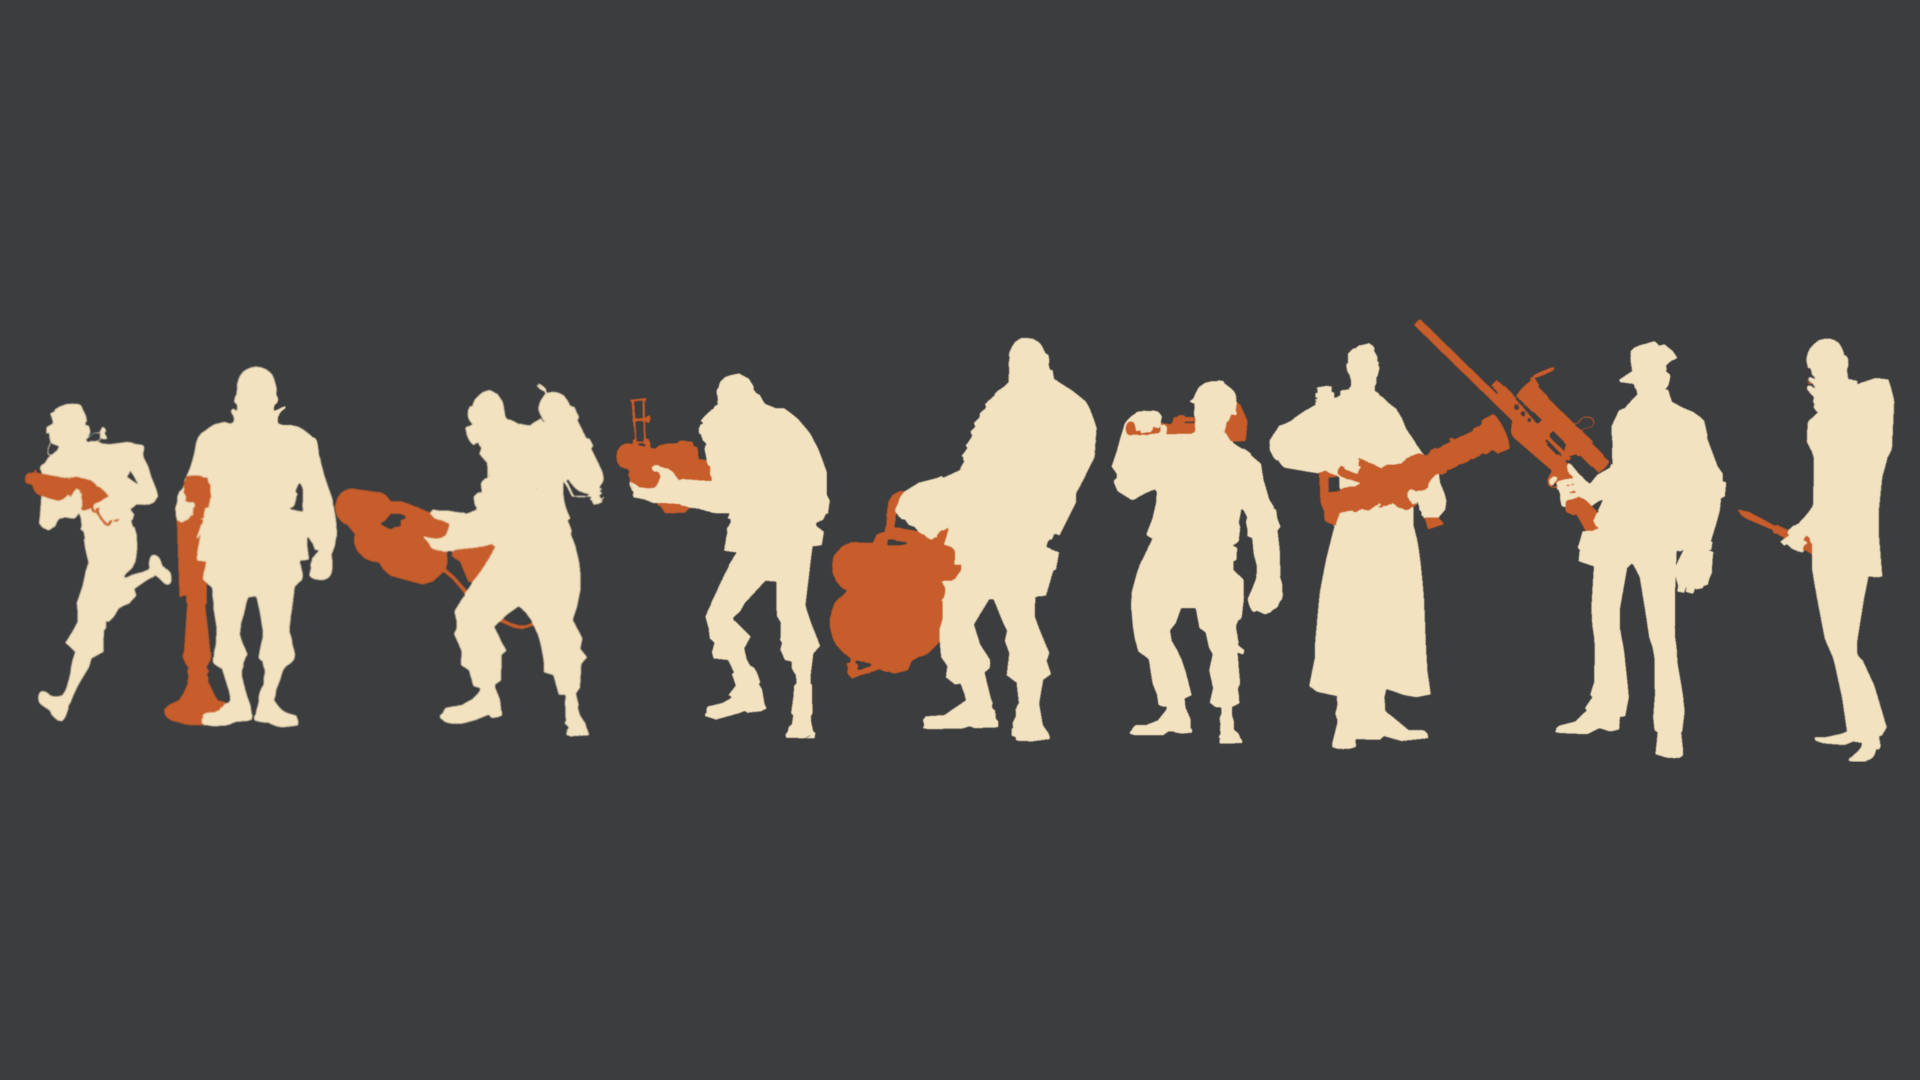 Team Fortress 2 Character Silhouette